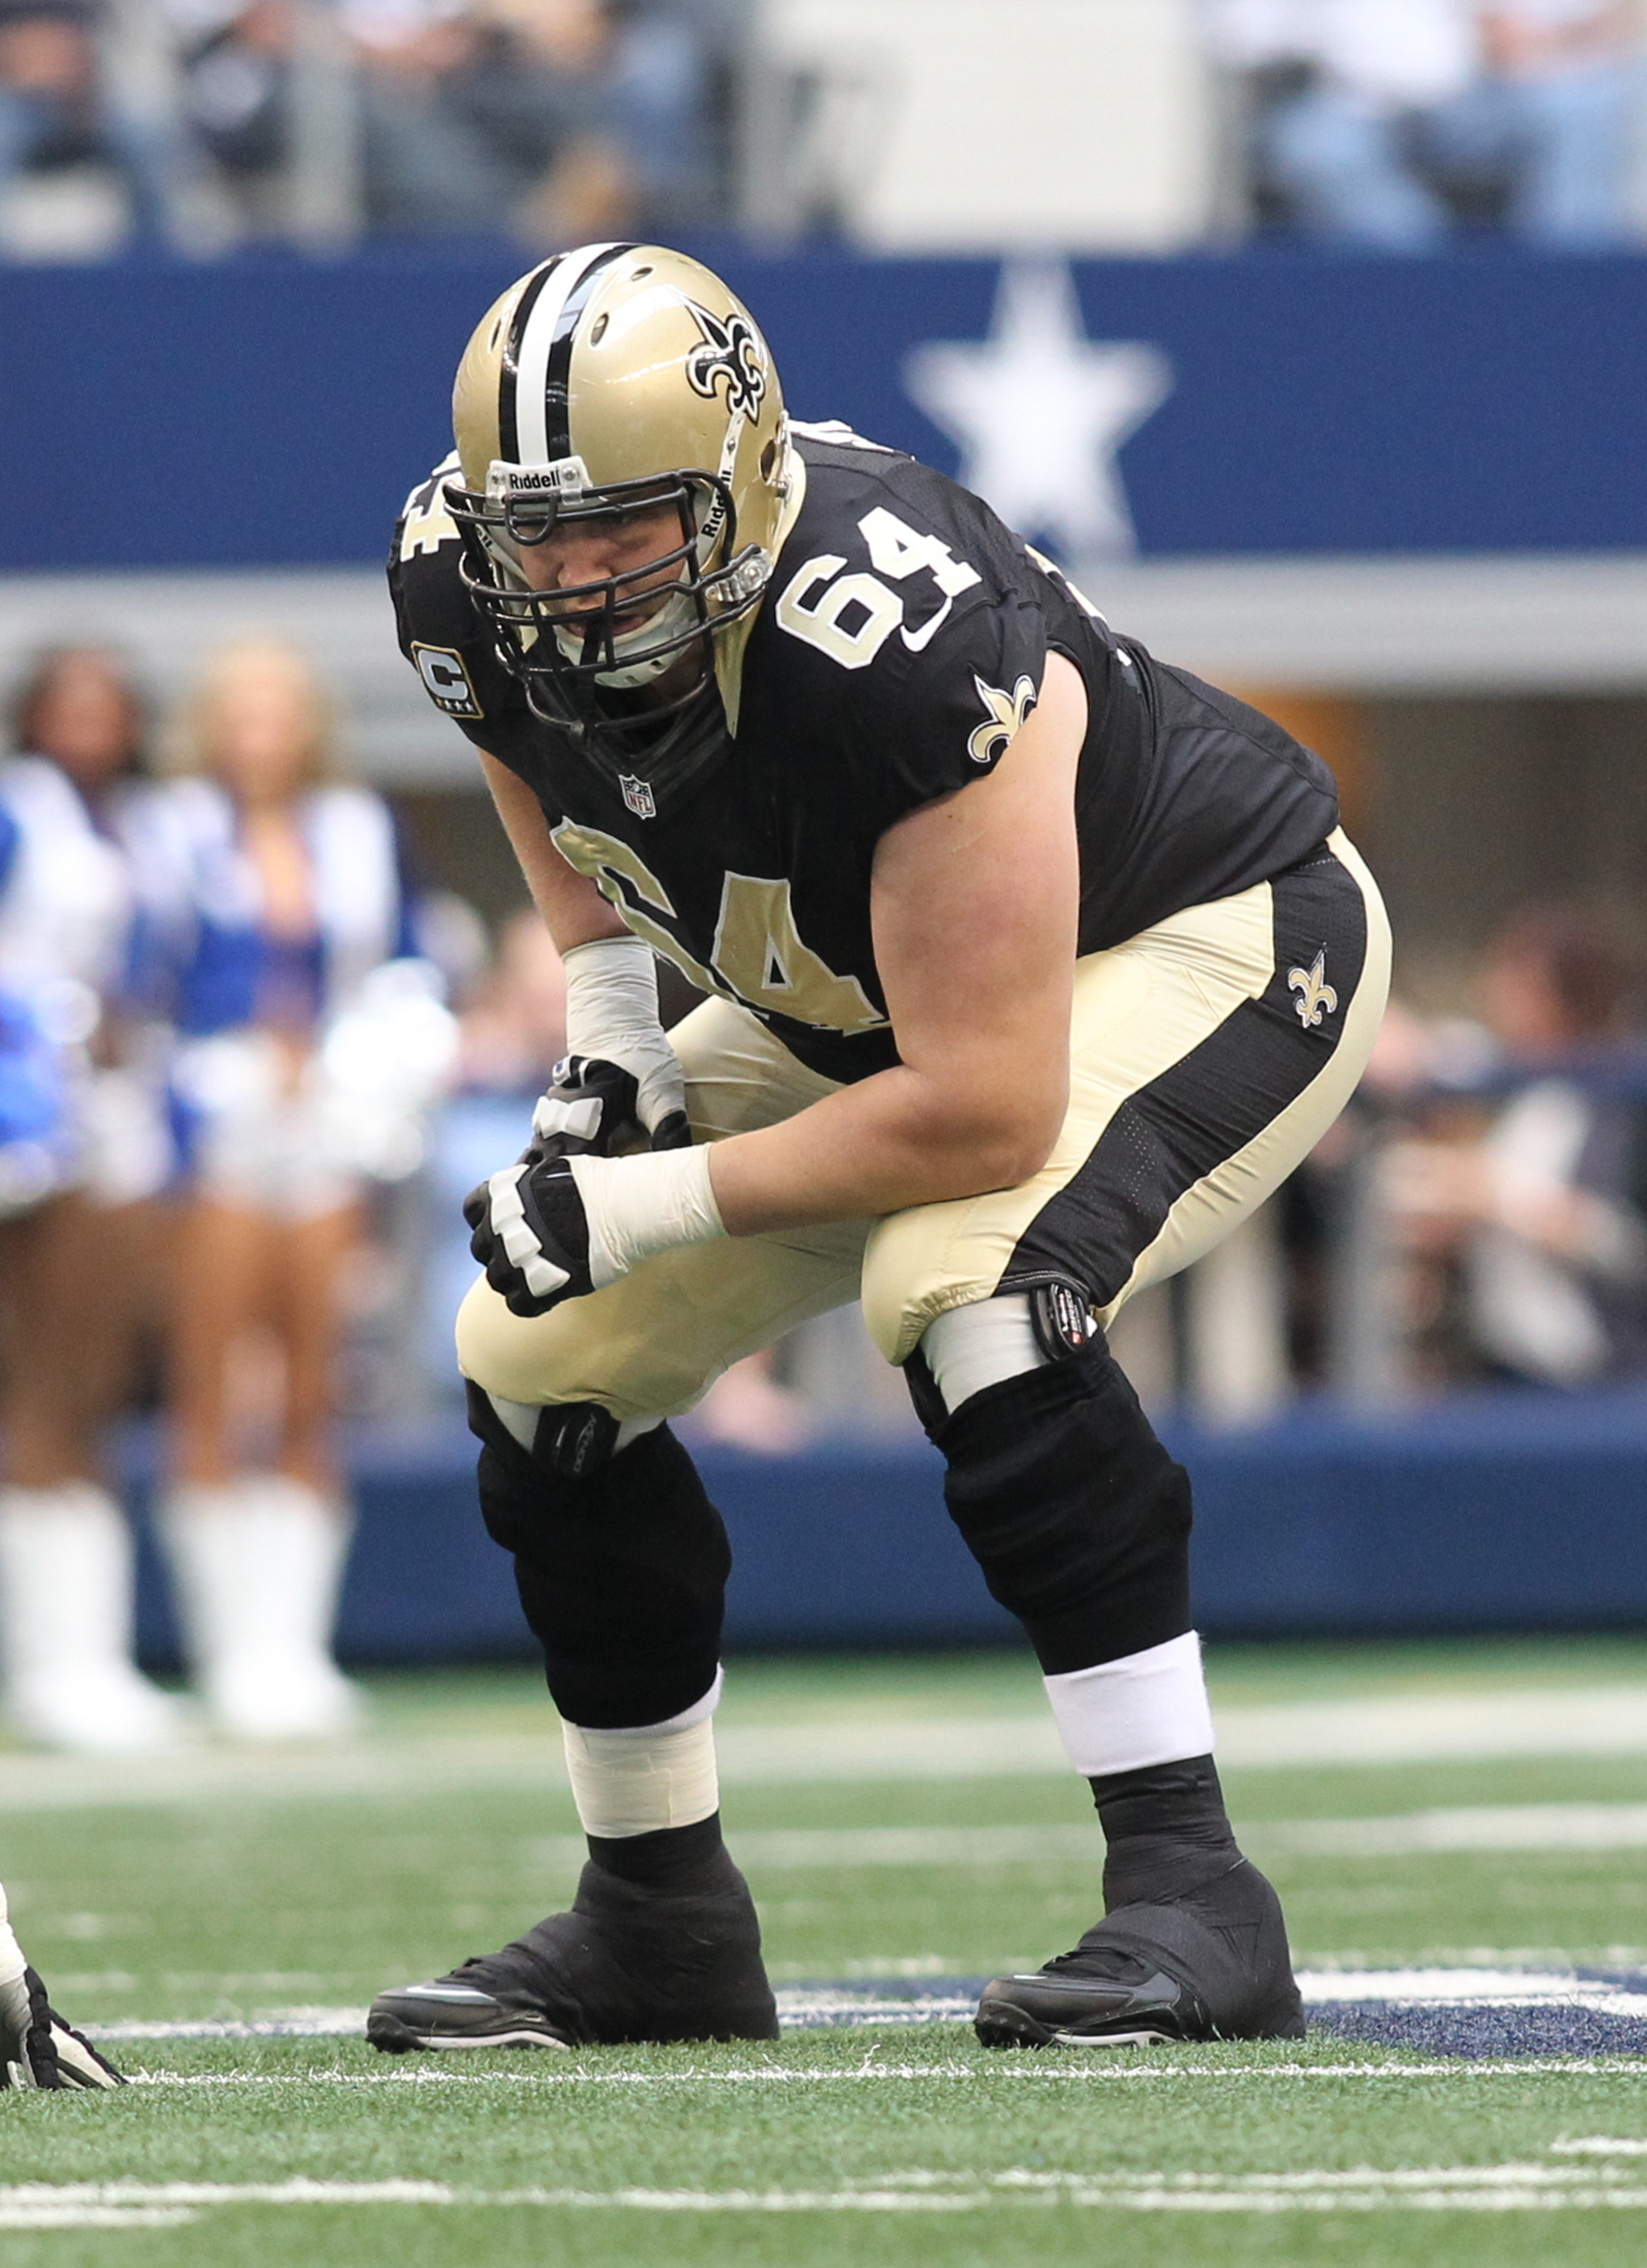 When healthy, Zach Strief can be among the better right tackles in the league.